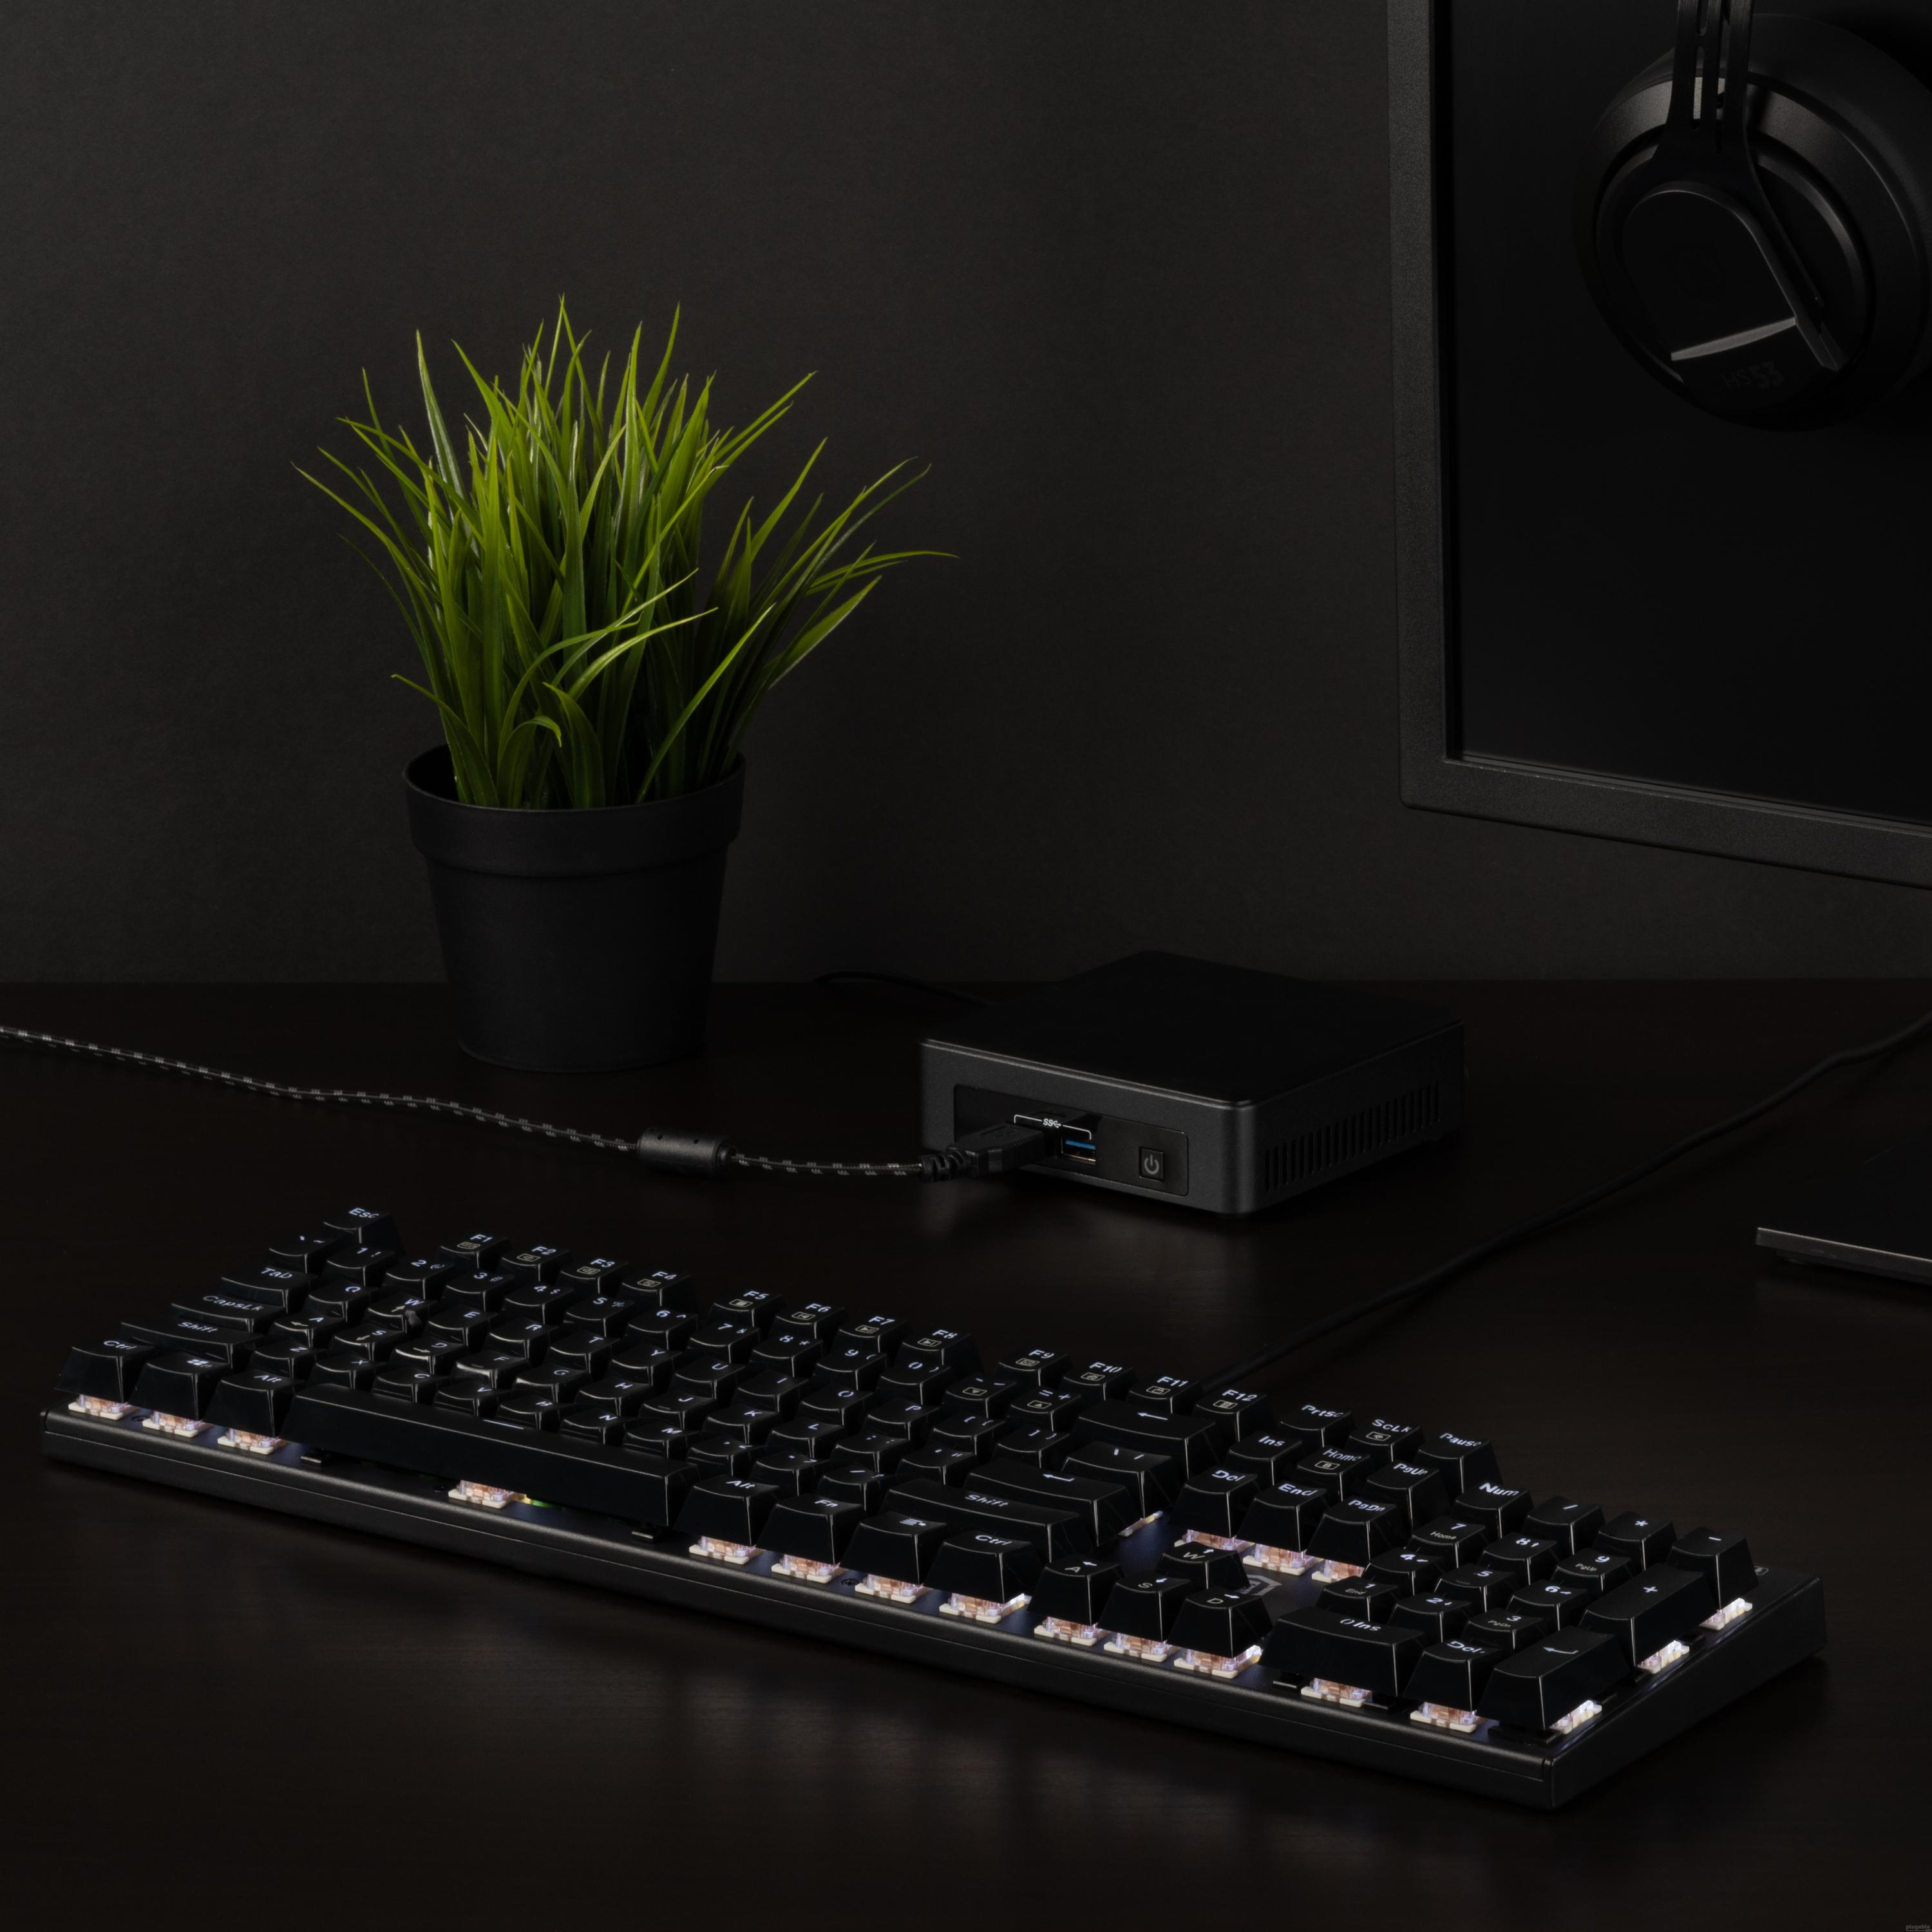 Plugable Mechanical Keyboard - Professional Office Clicky Style - Wired USB, Full-Size 104 Key, Adjustable White LEDs, Replaceable Blue Switches, Durable Doubleshot ABS Keycaps - image 4 of 9